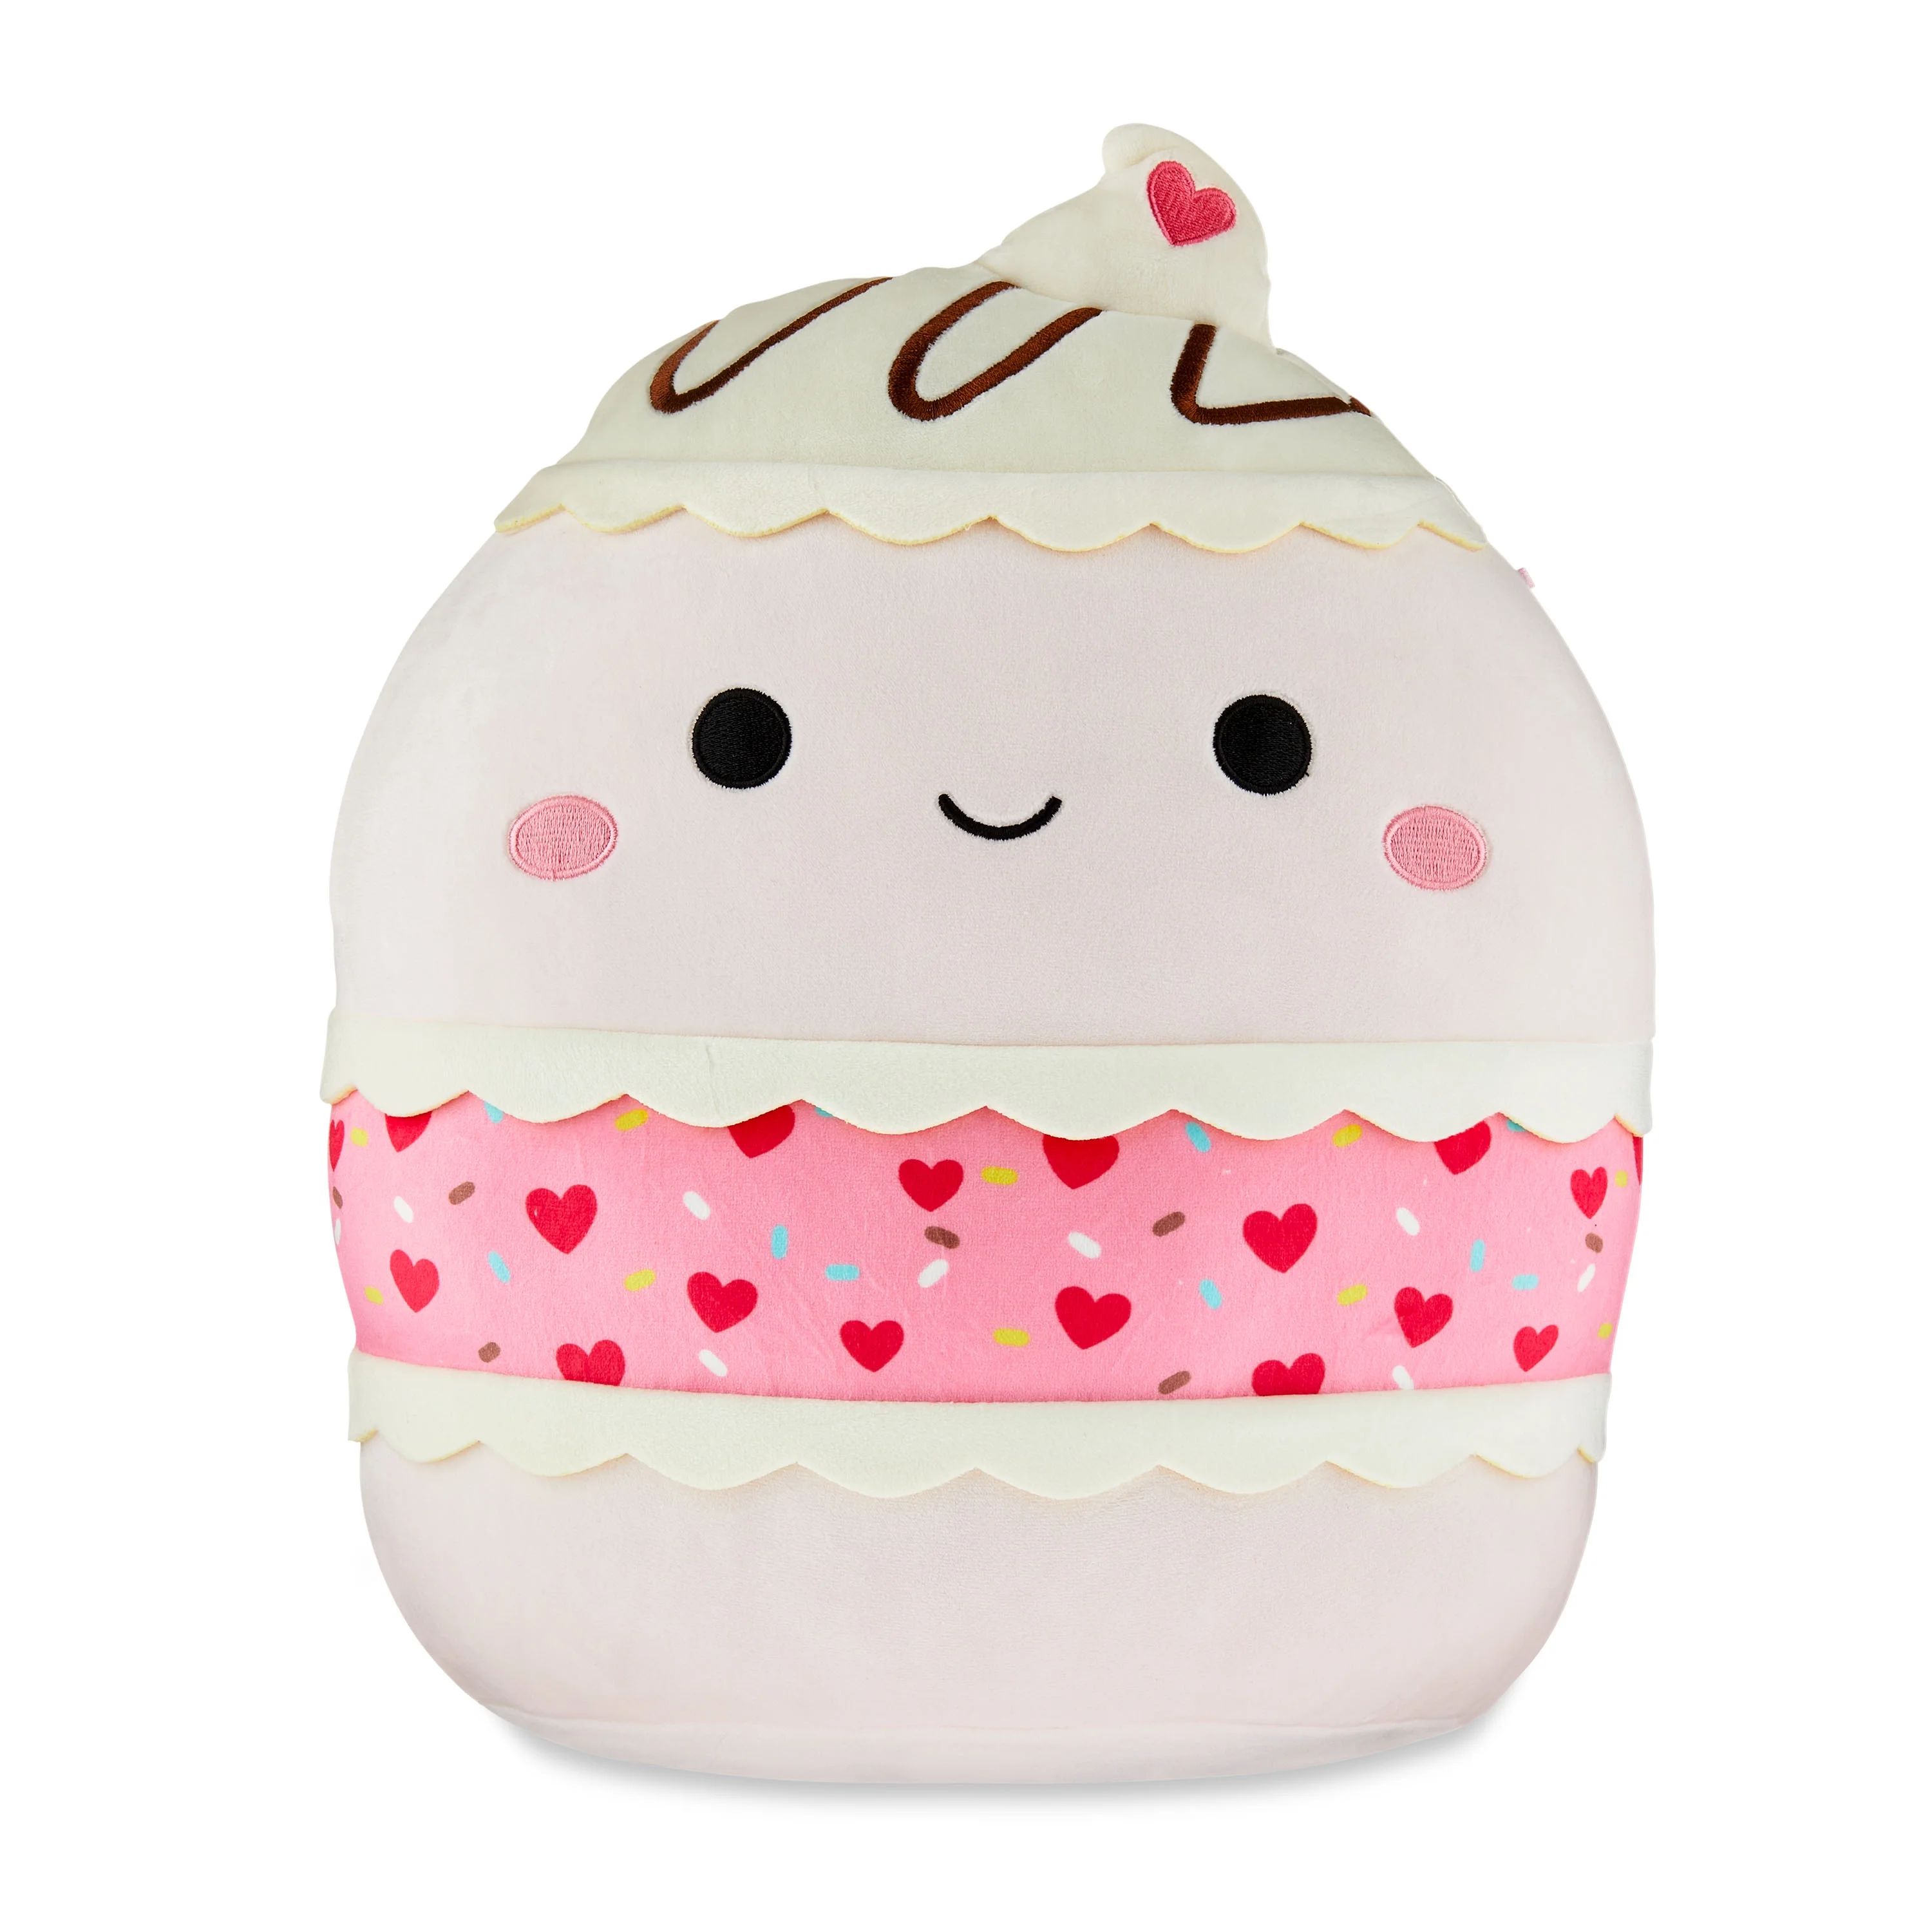 Squishmallows Official Plush 12 inch Pink Cake - Child's Ultra Soft Stuffed Plush Toy | Walmart (US)